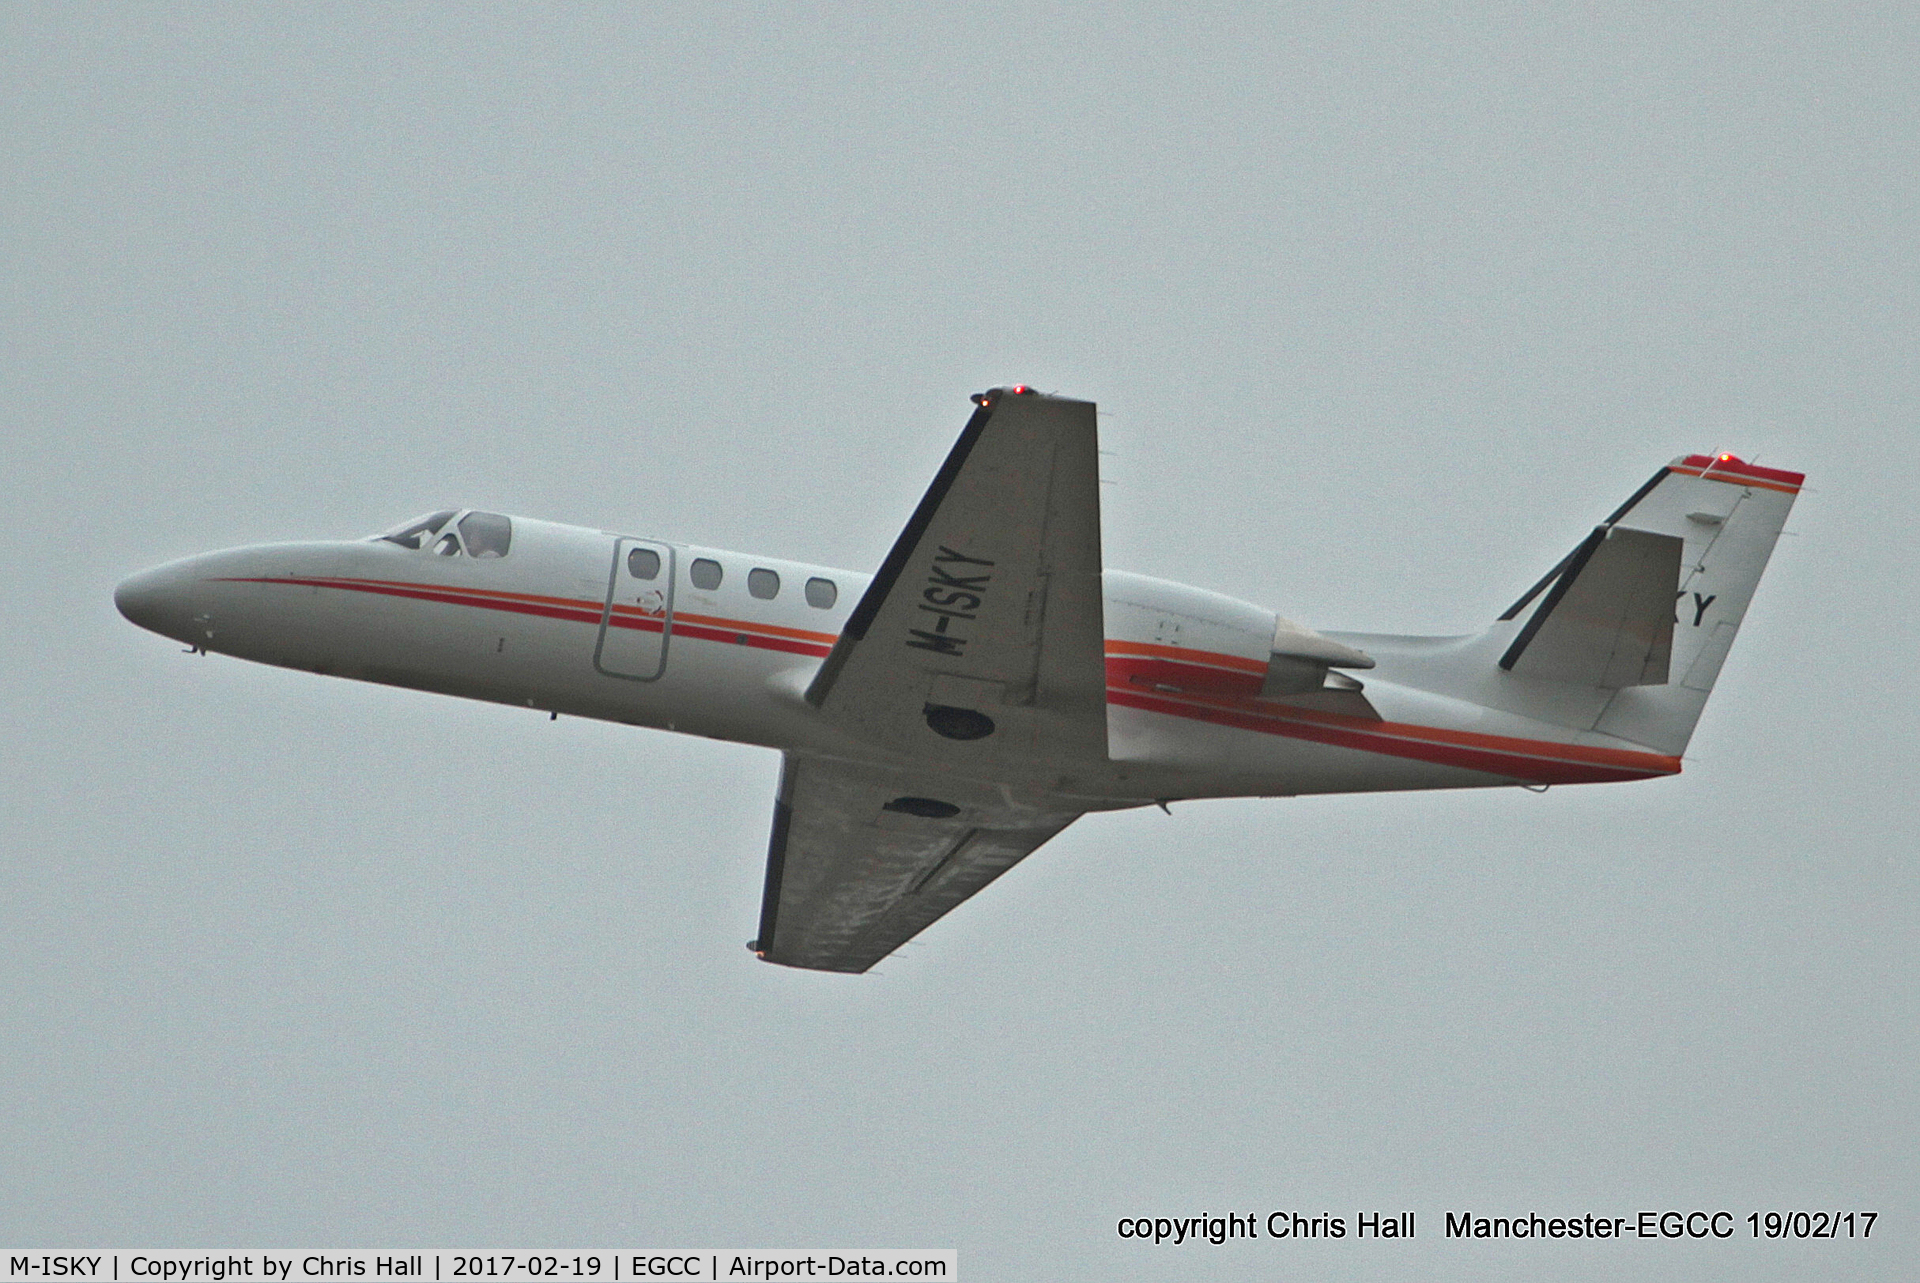 M-ISKY, 1999 Cessna 550 Citation Bravo C/N 550-0870, departing from Manchester